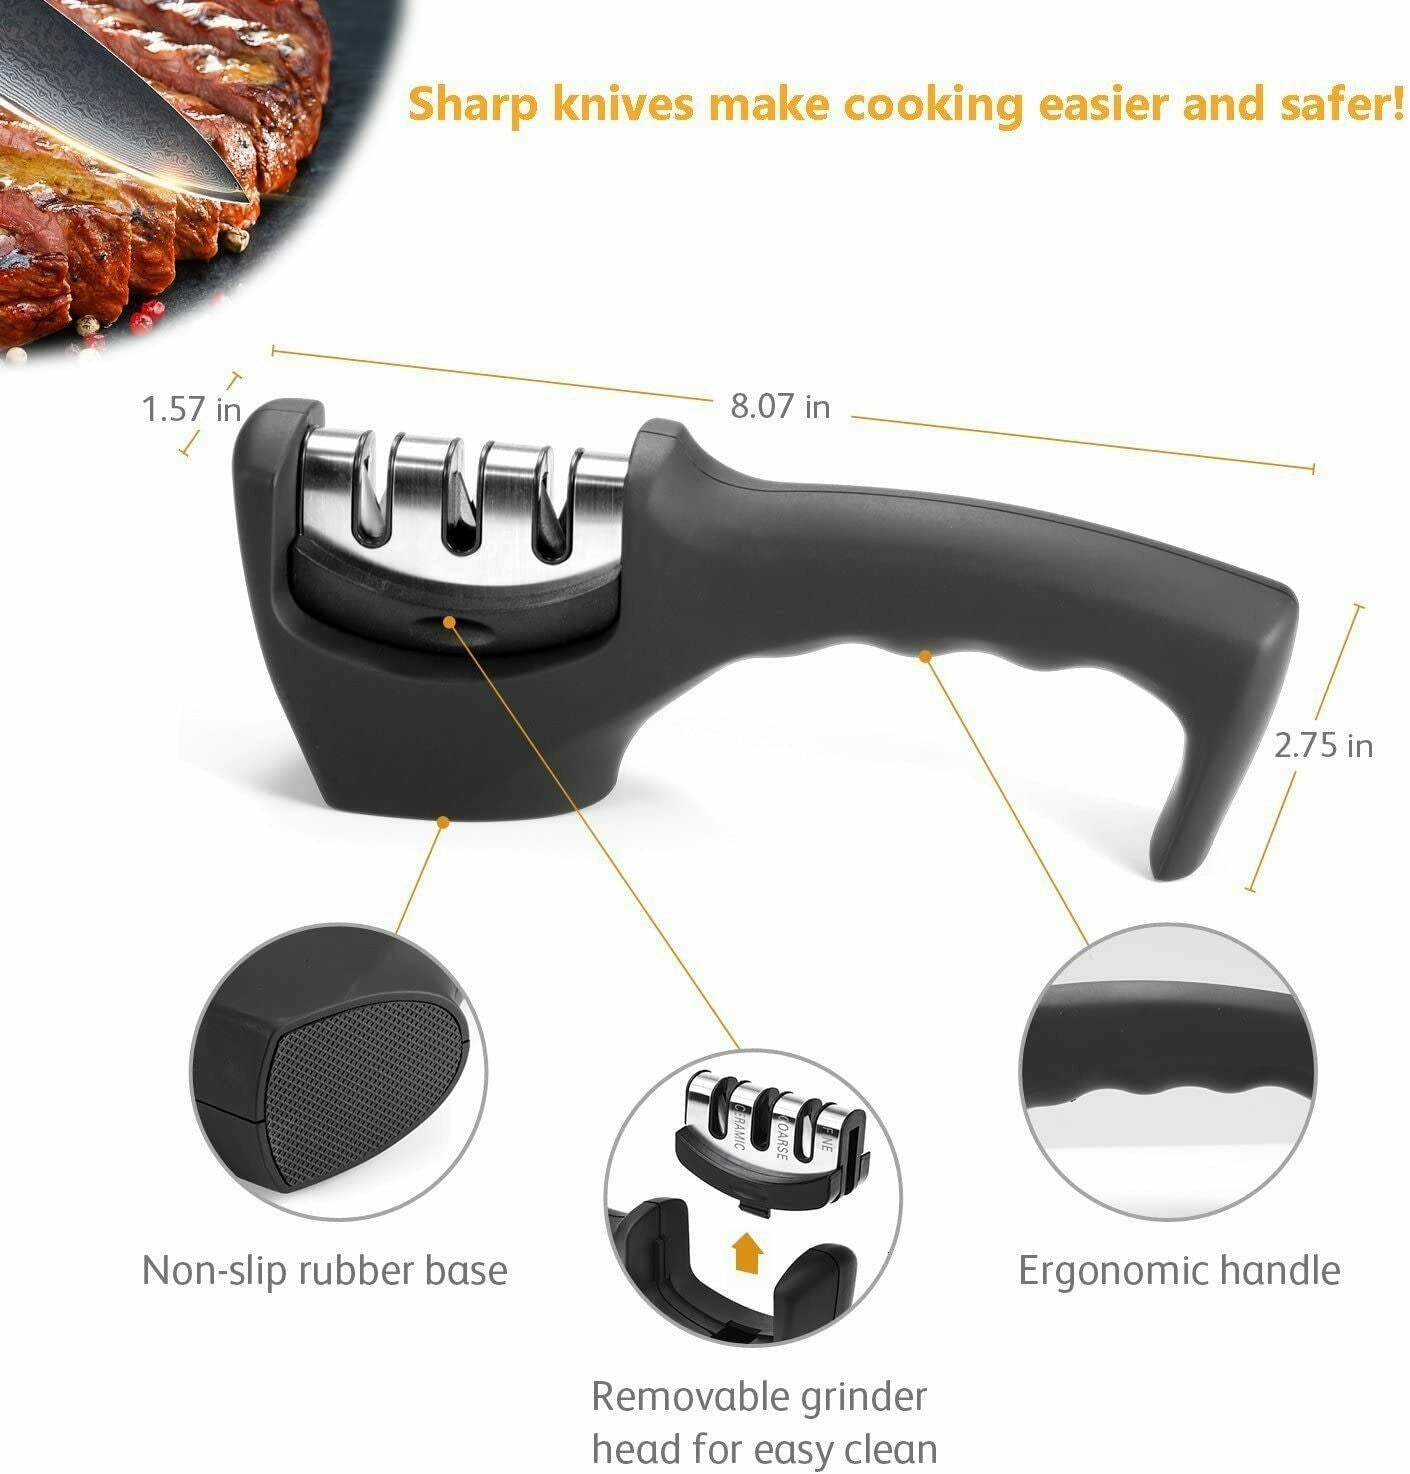 Dropship KNIFE SHARPENER Ceramic Tungsten Kitchen Knives Blade Sharpening  System Tool USA XH to Sell Online at a Lower Price